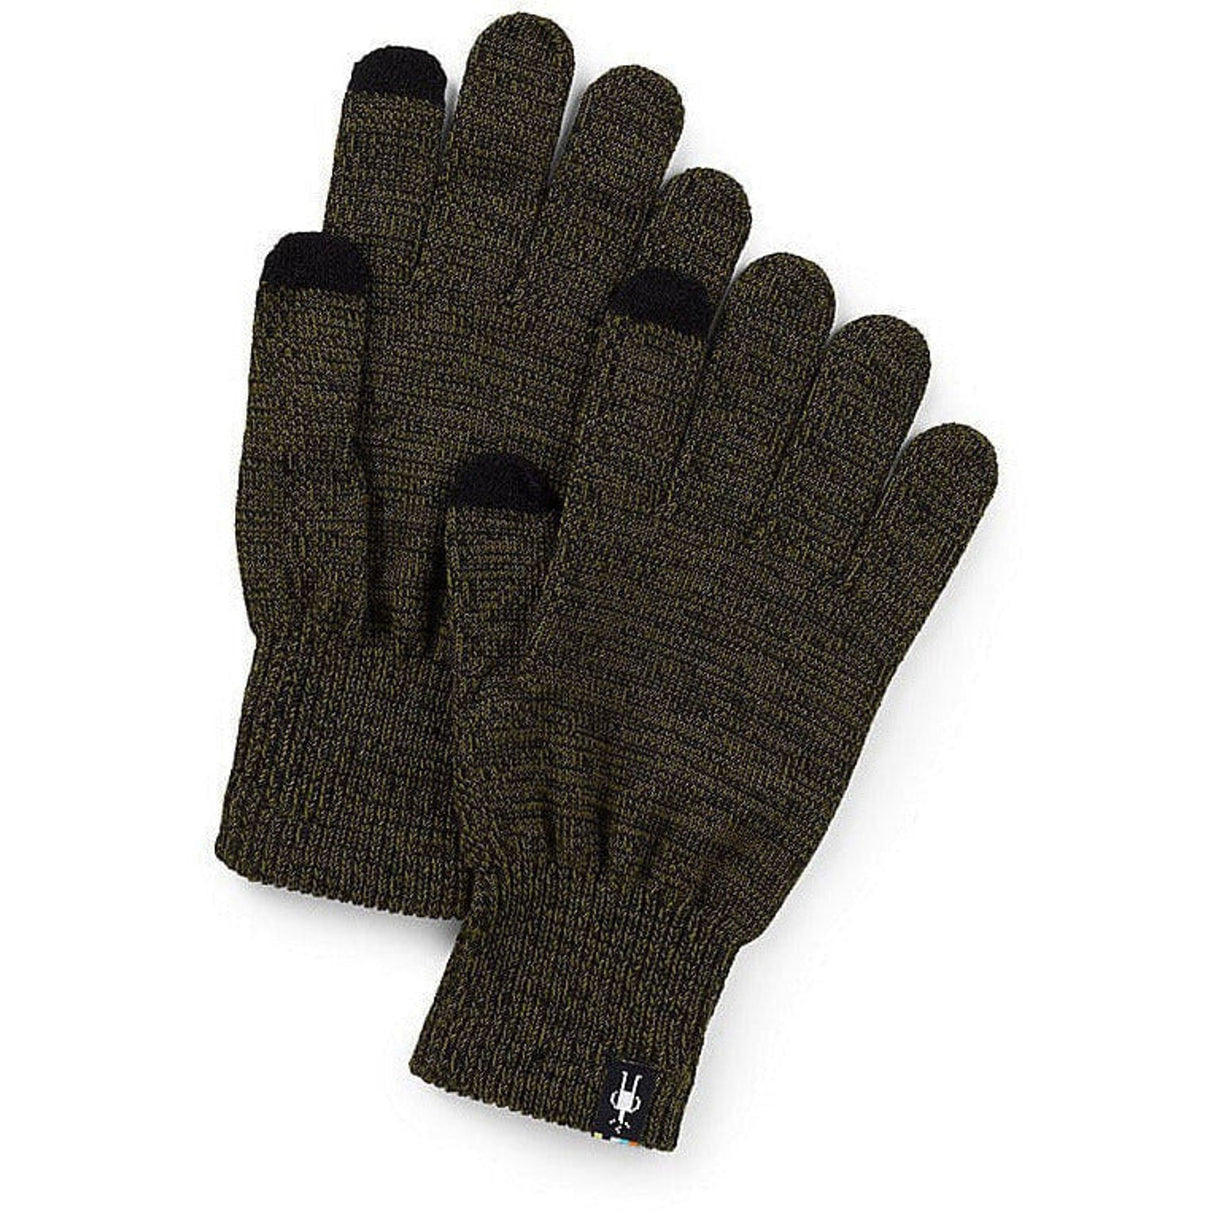 Smartwool Liner Gloves  -  X-Small / Winter Moss Heather